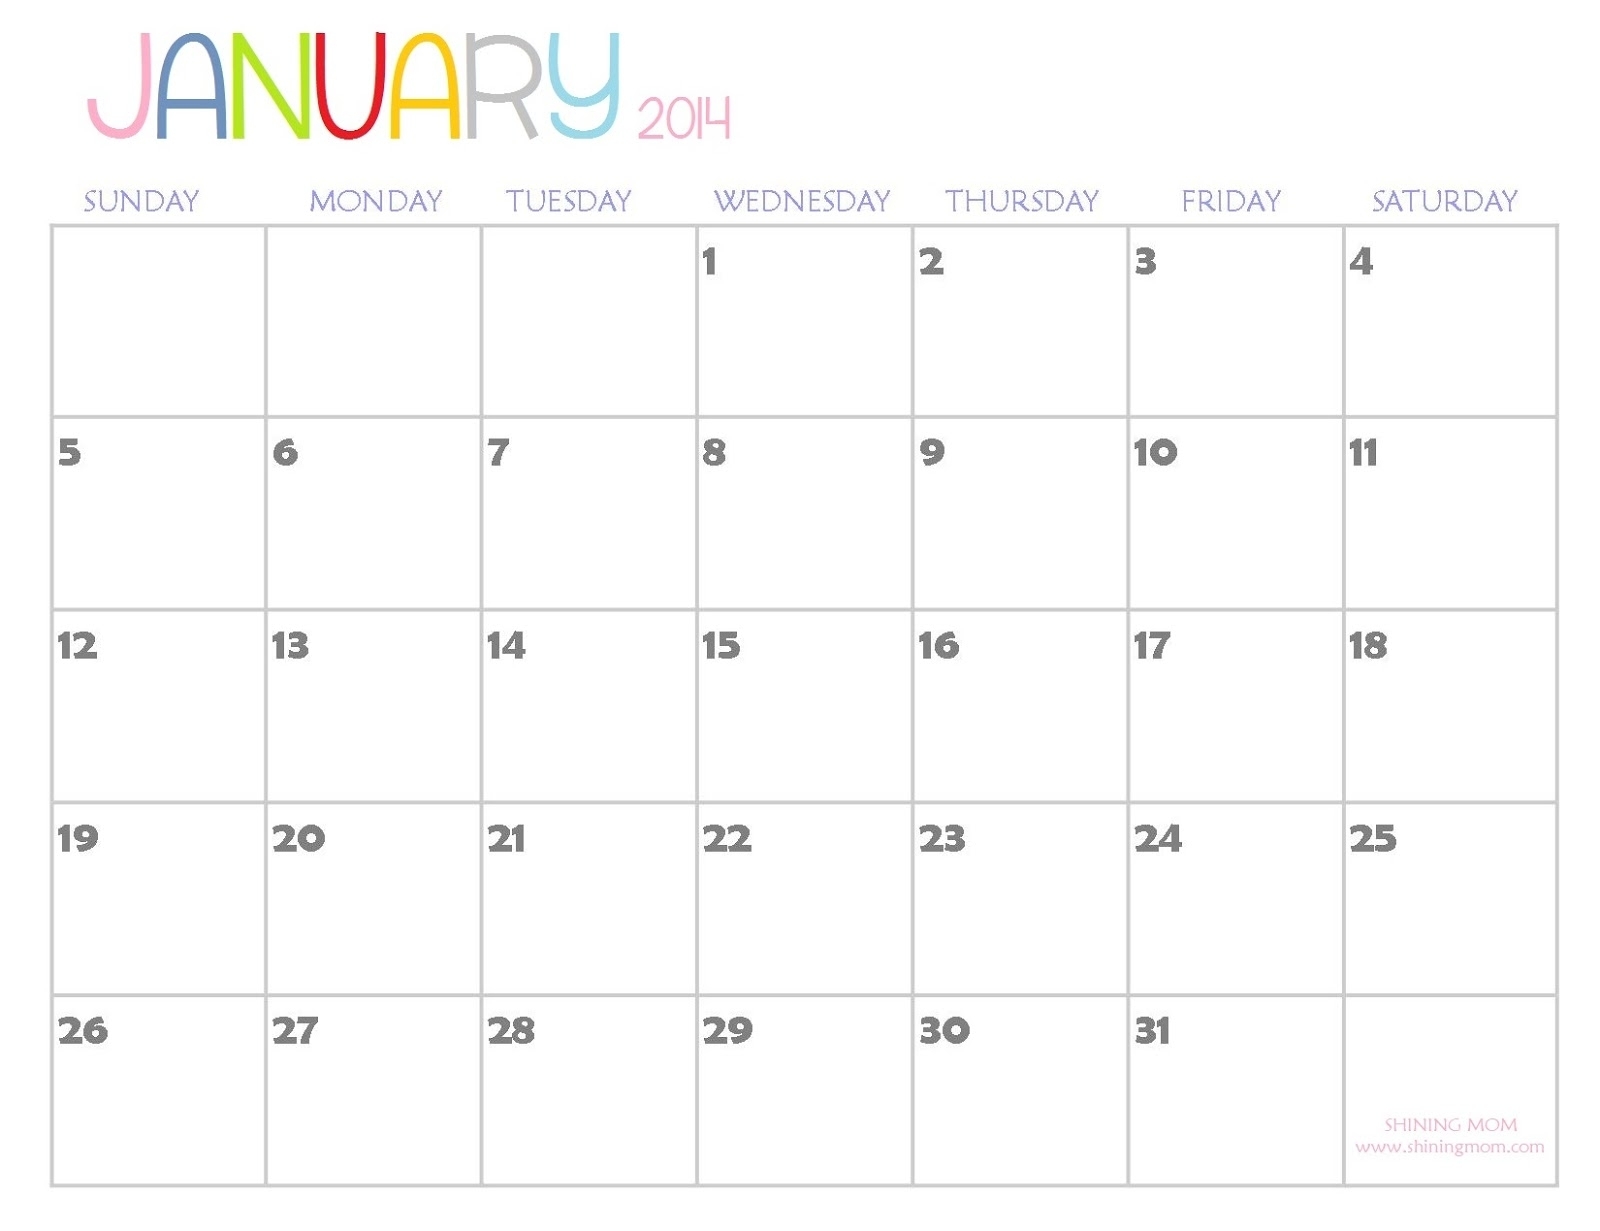 The Free Printable 2014 Calendarshining Mom Is Here!